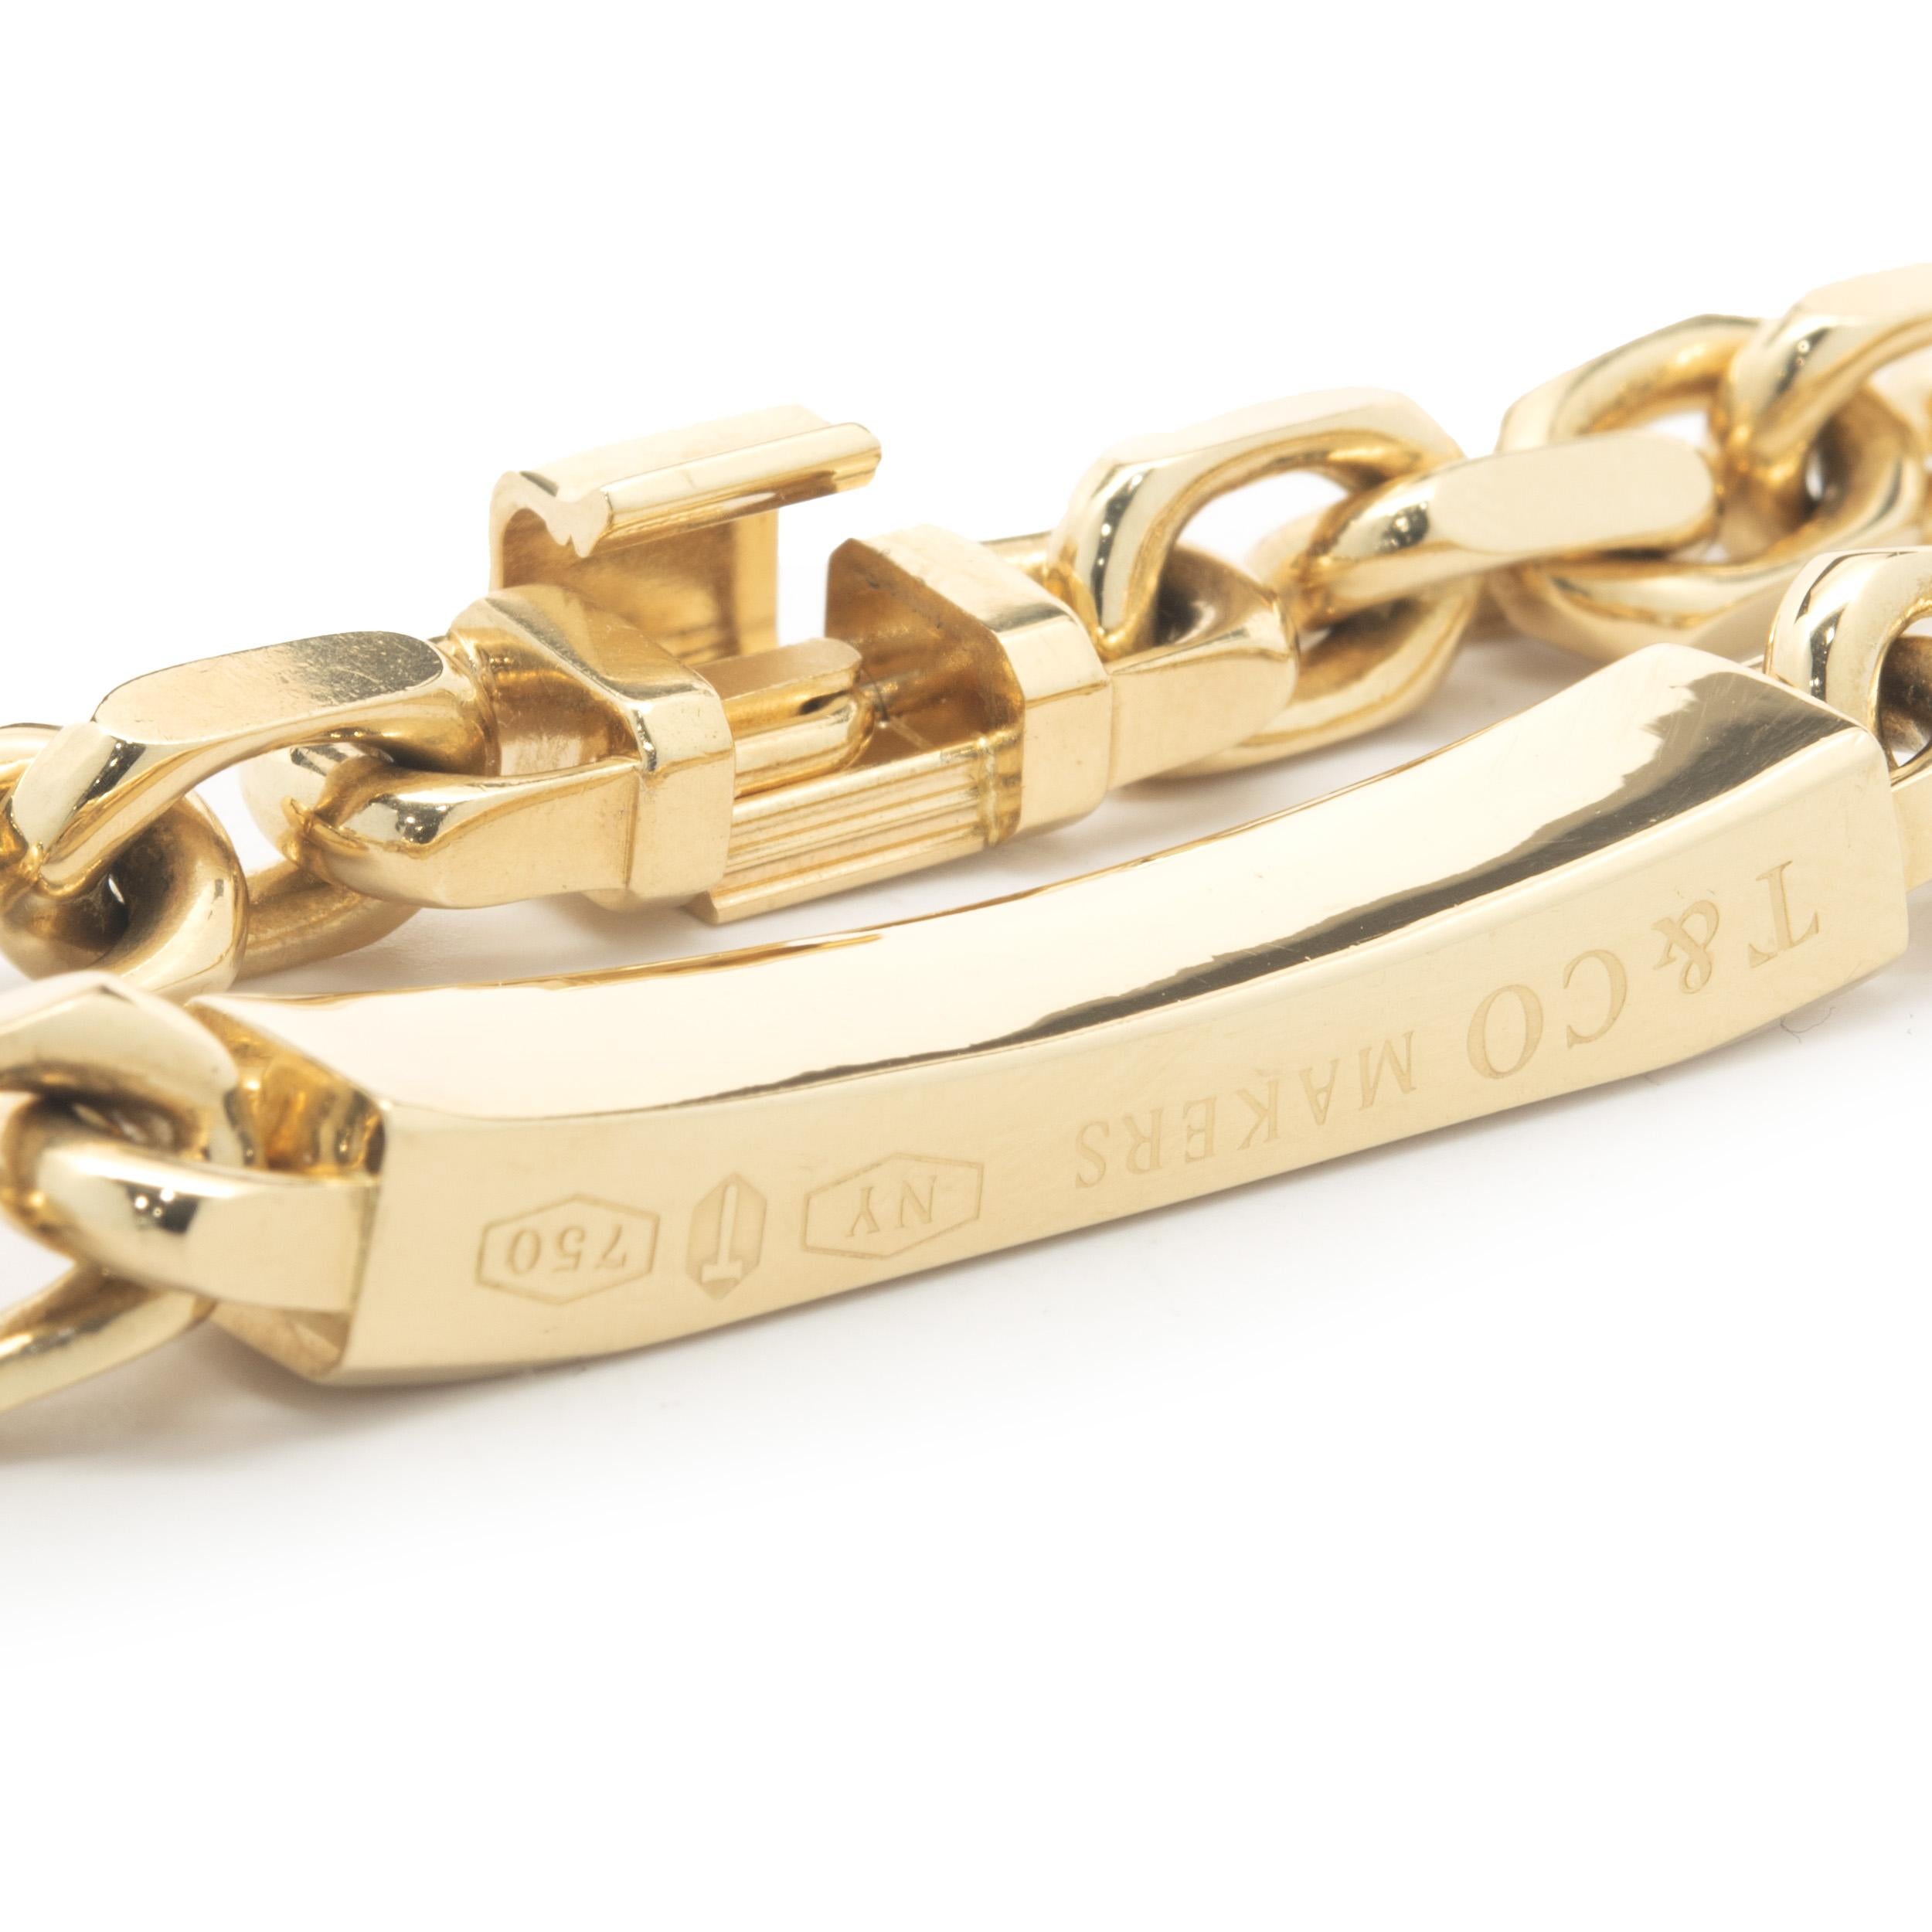 Designer: Tiffany & Co. 
Material: 18K yellow gold
Dimensions: bracelet measures 8.25-inches in length
Weight: 67.32 grams